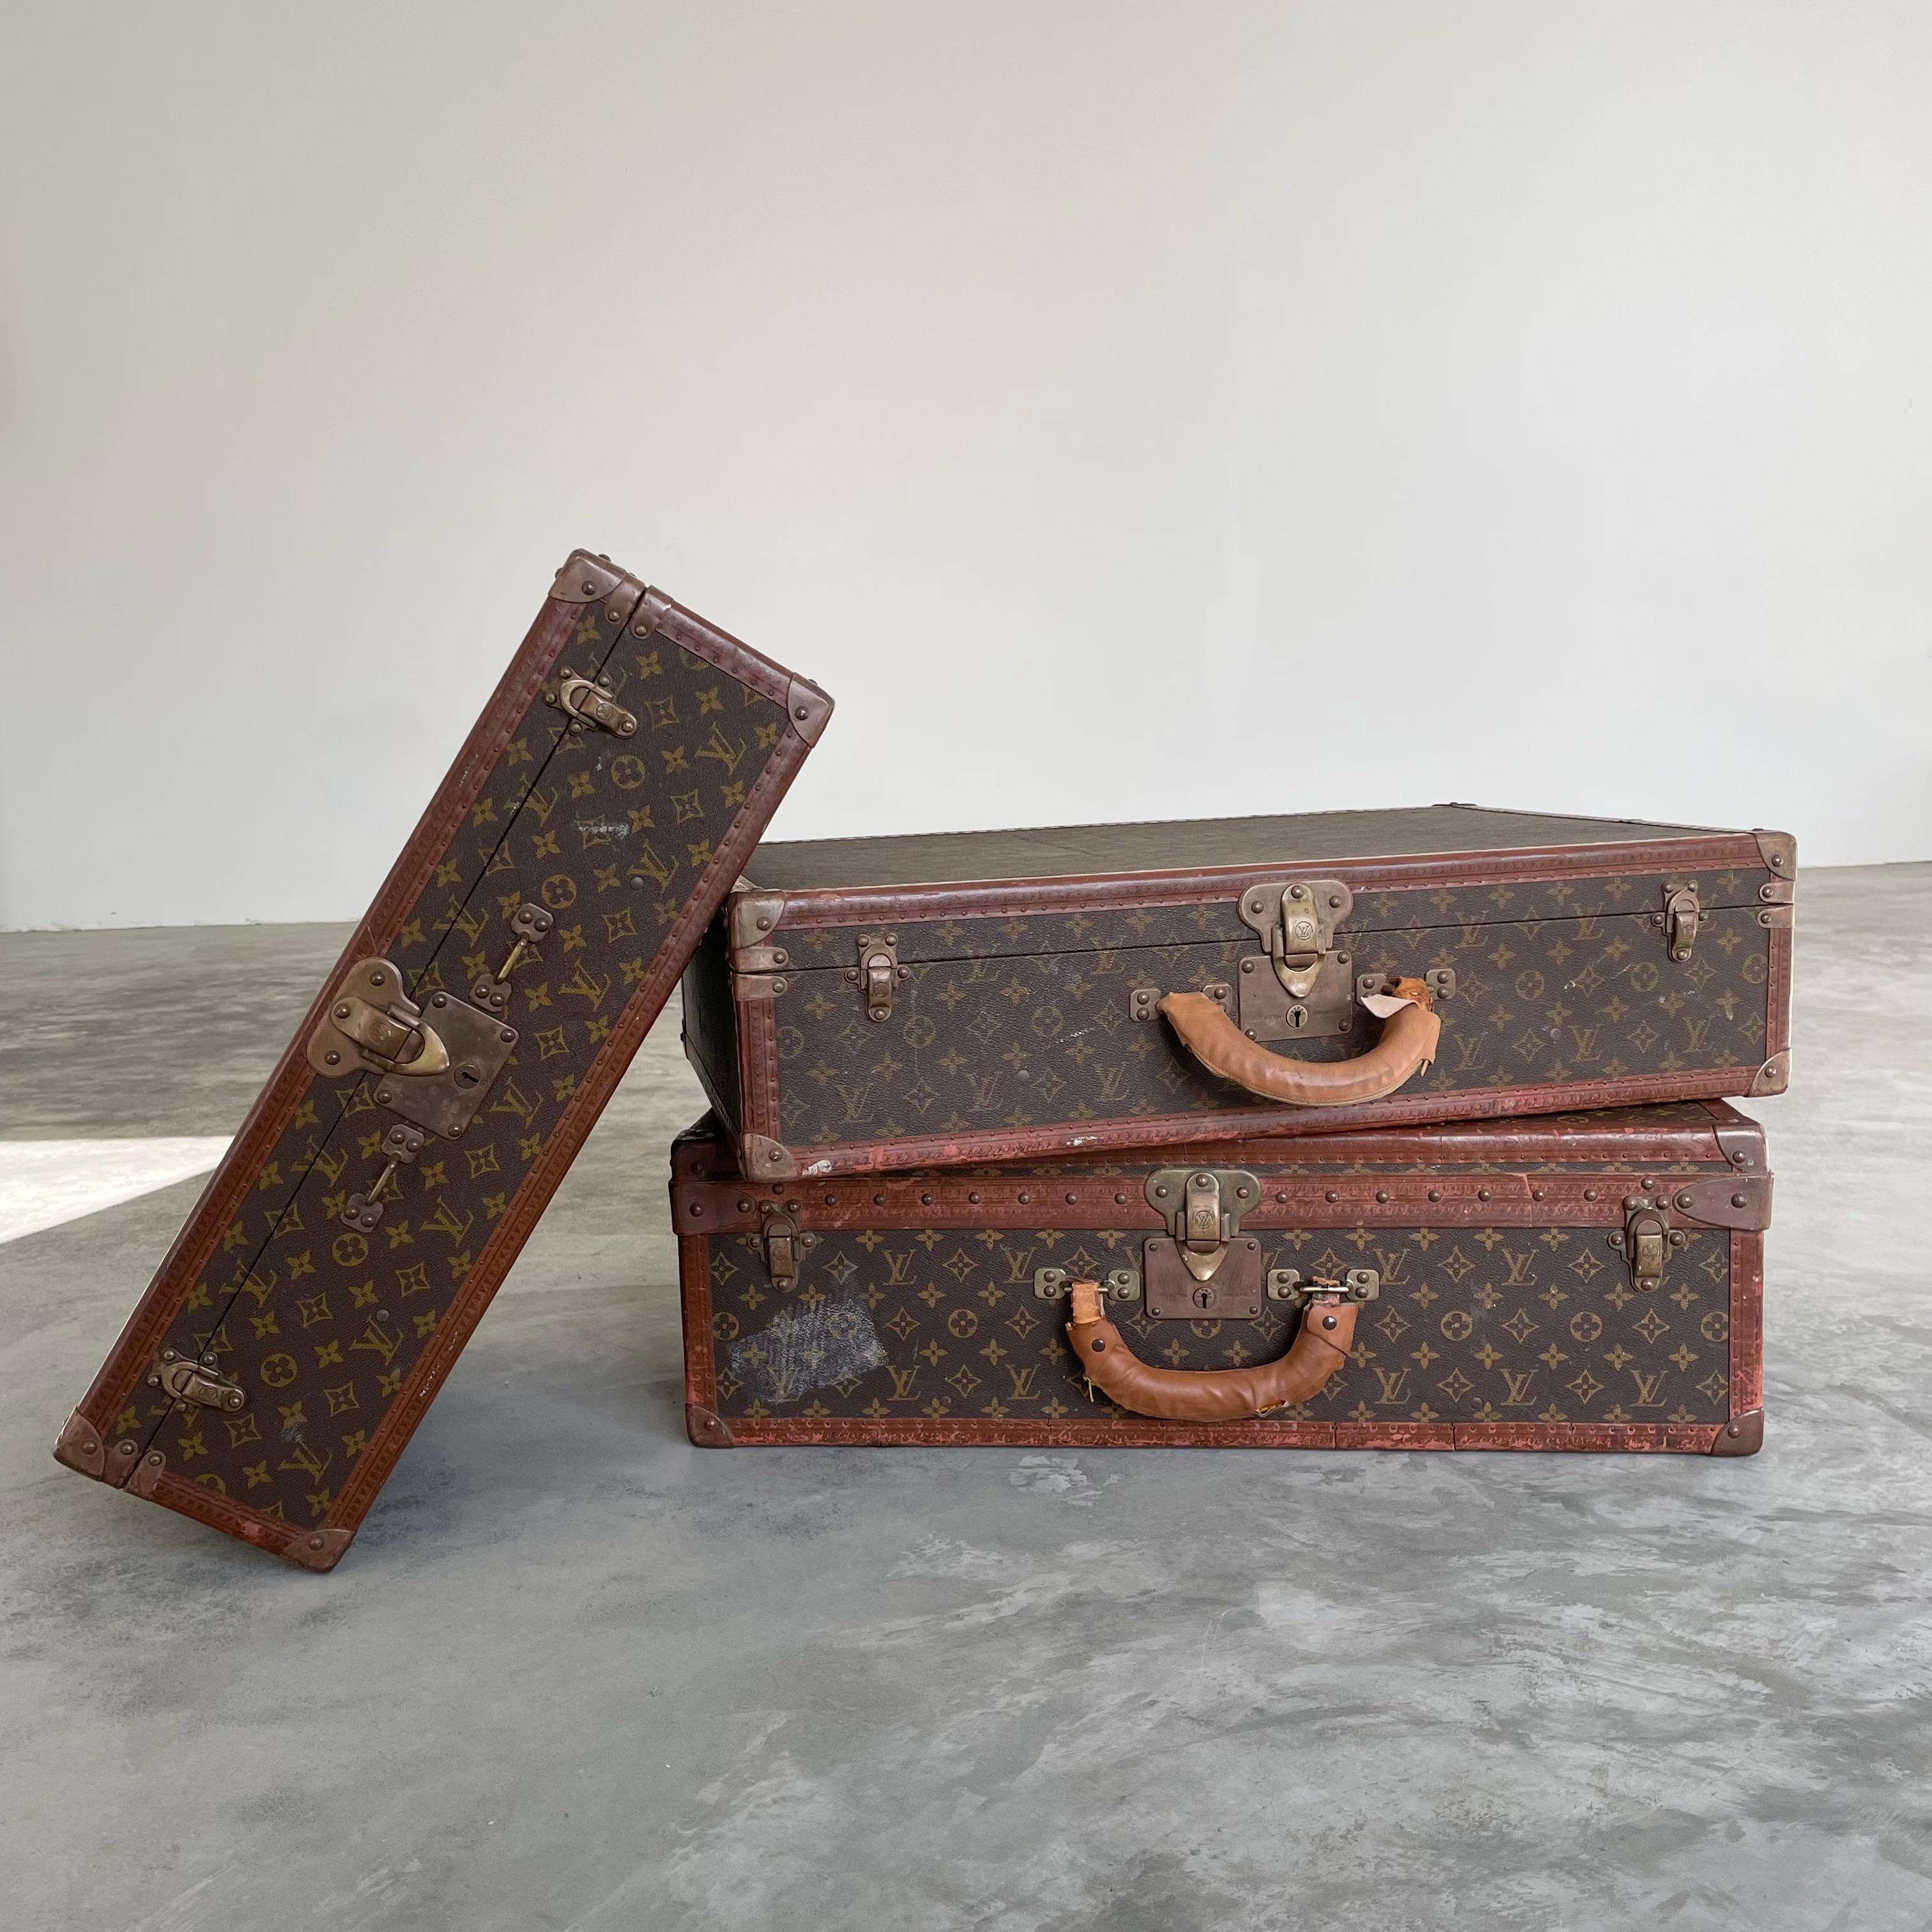 Set of 3 classic vintage Louis Vuitton trunk suitcases from 1948. Perfect as art displayed in the home and functional for travel and weekend trips. These LV monogram print trunks are made with saddle leather and brass hardware and wrapped in the